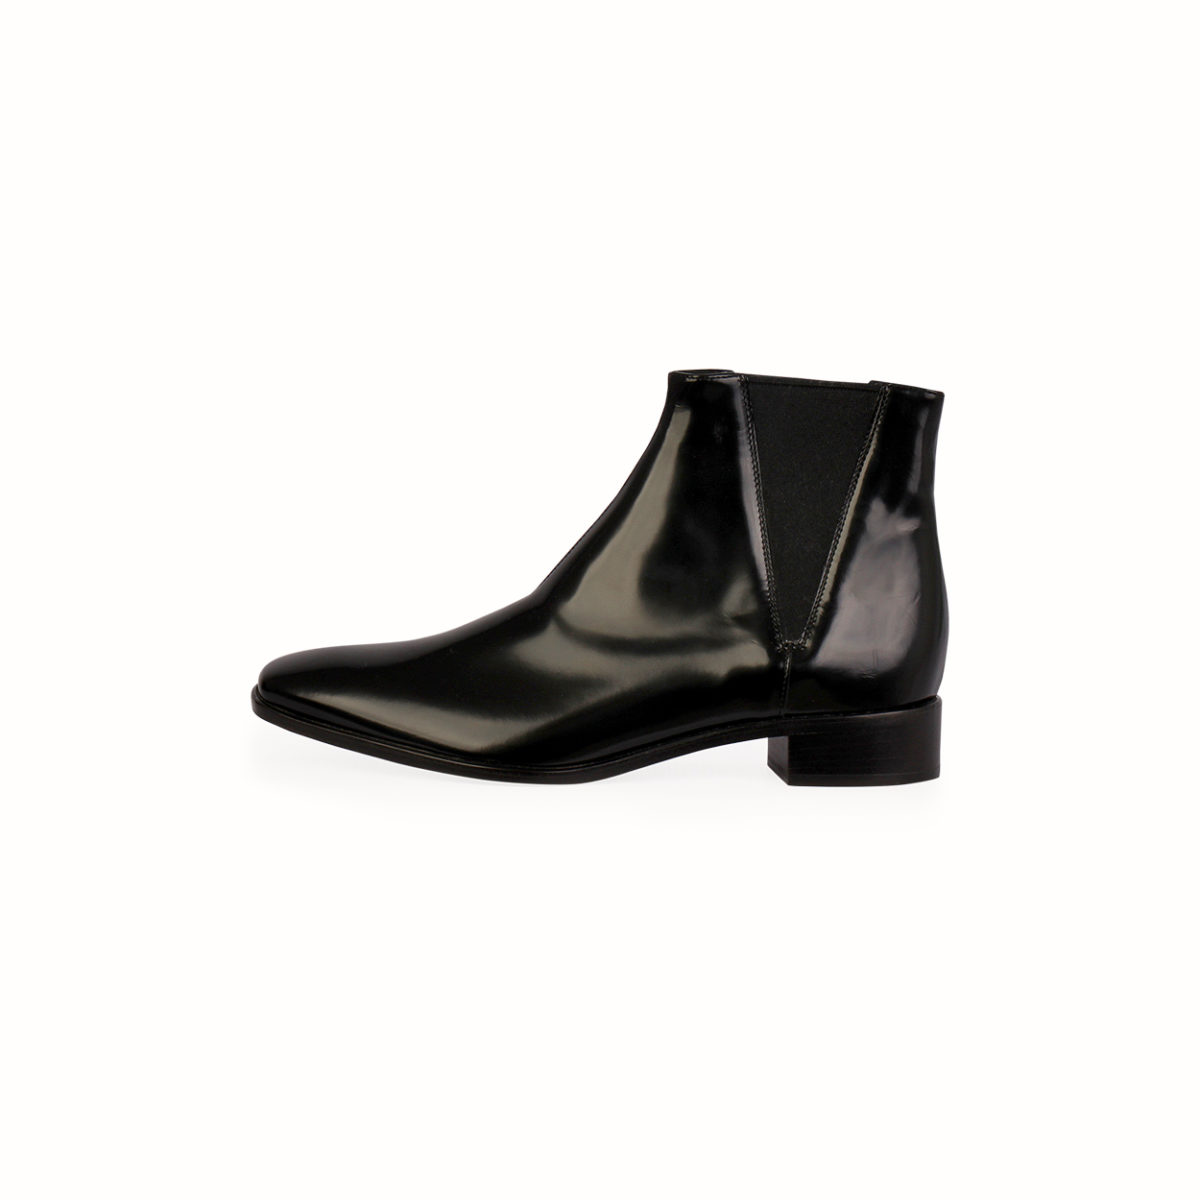 PRADA Patent Leather Chelsea Boots – S: 37 (4) - NEW | Luxity